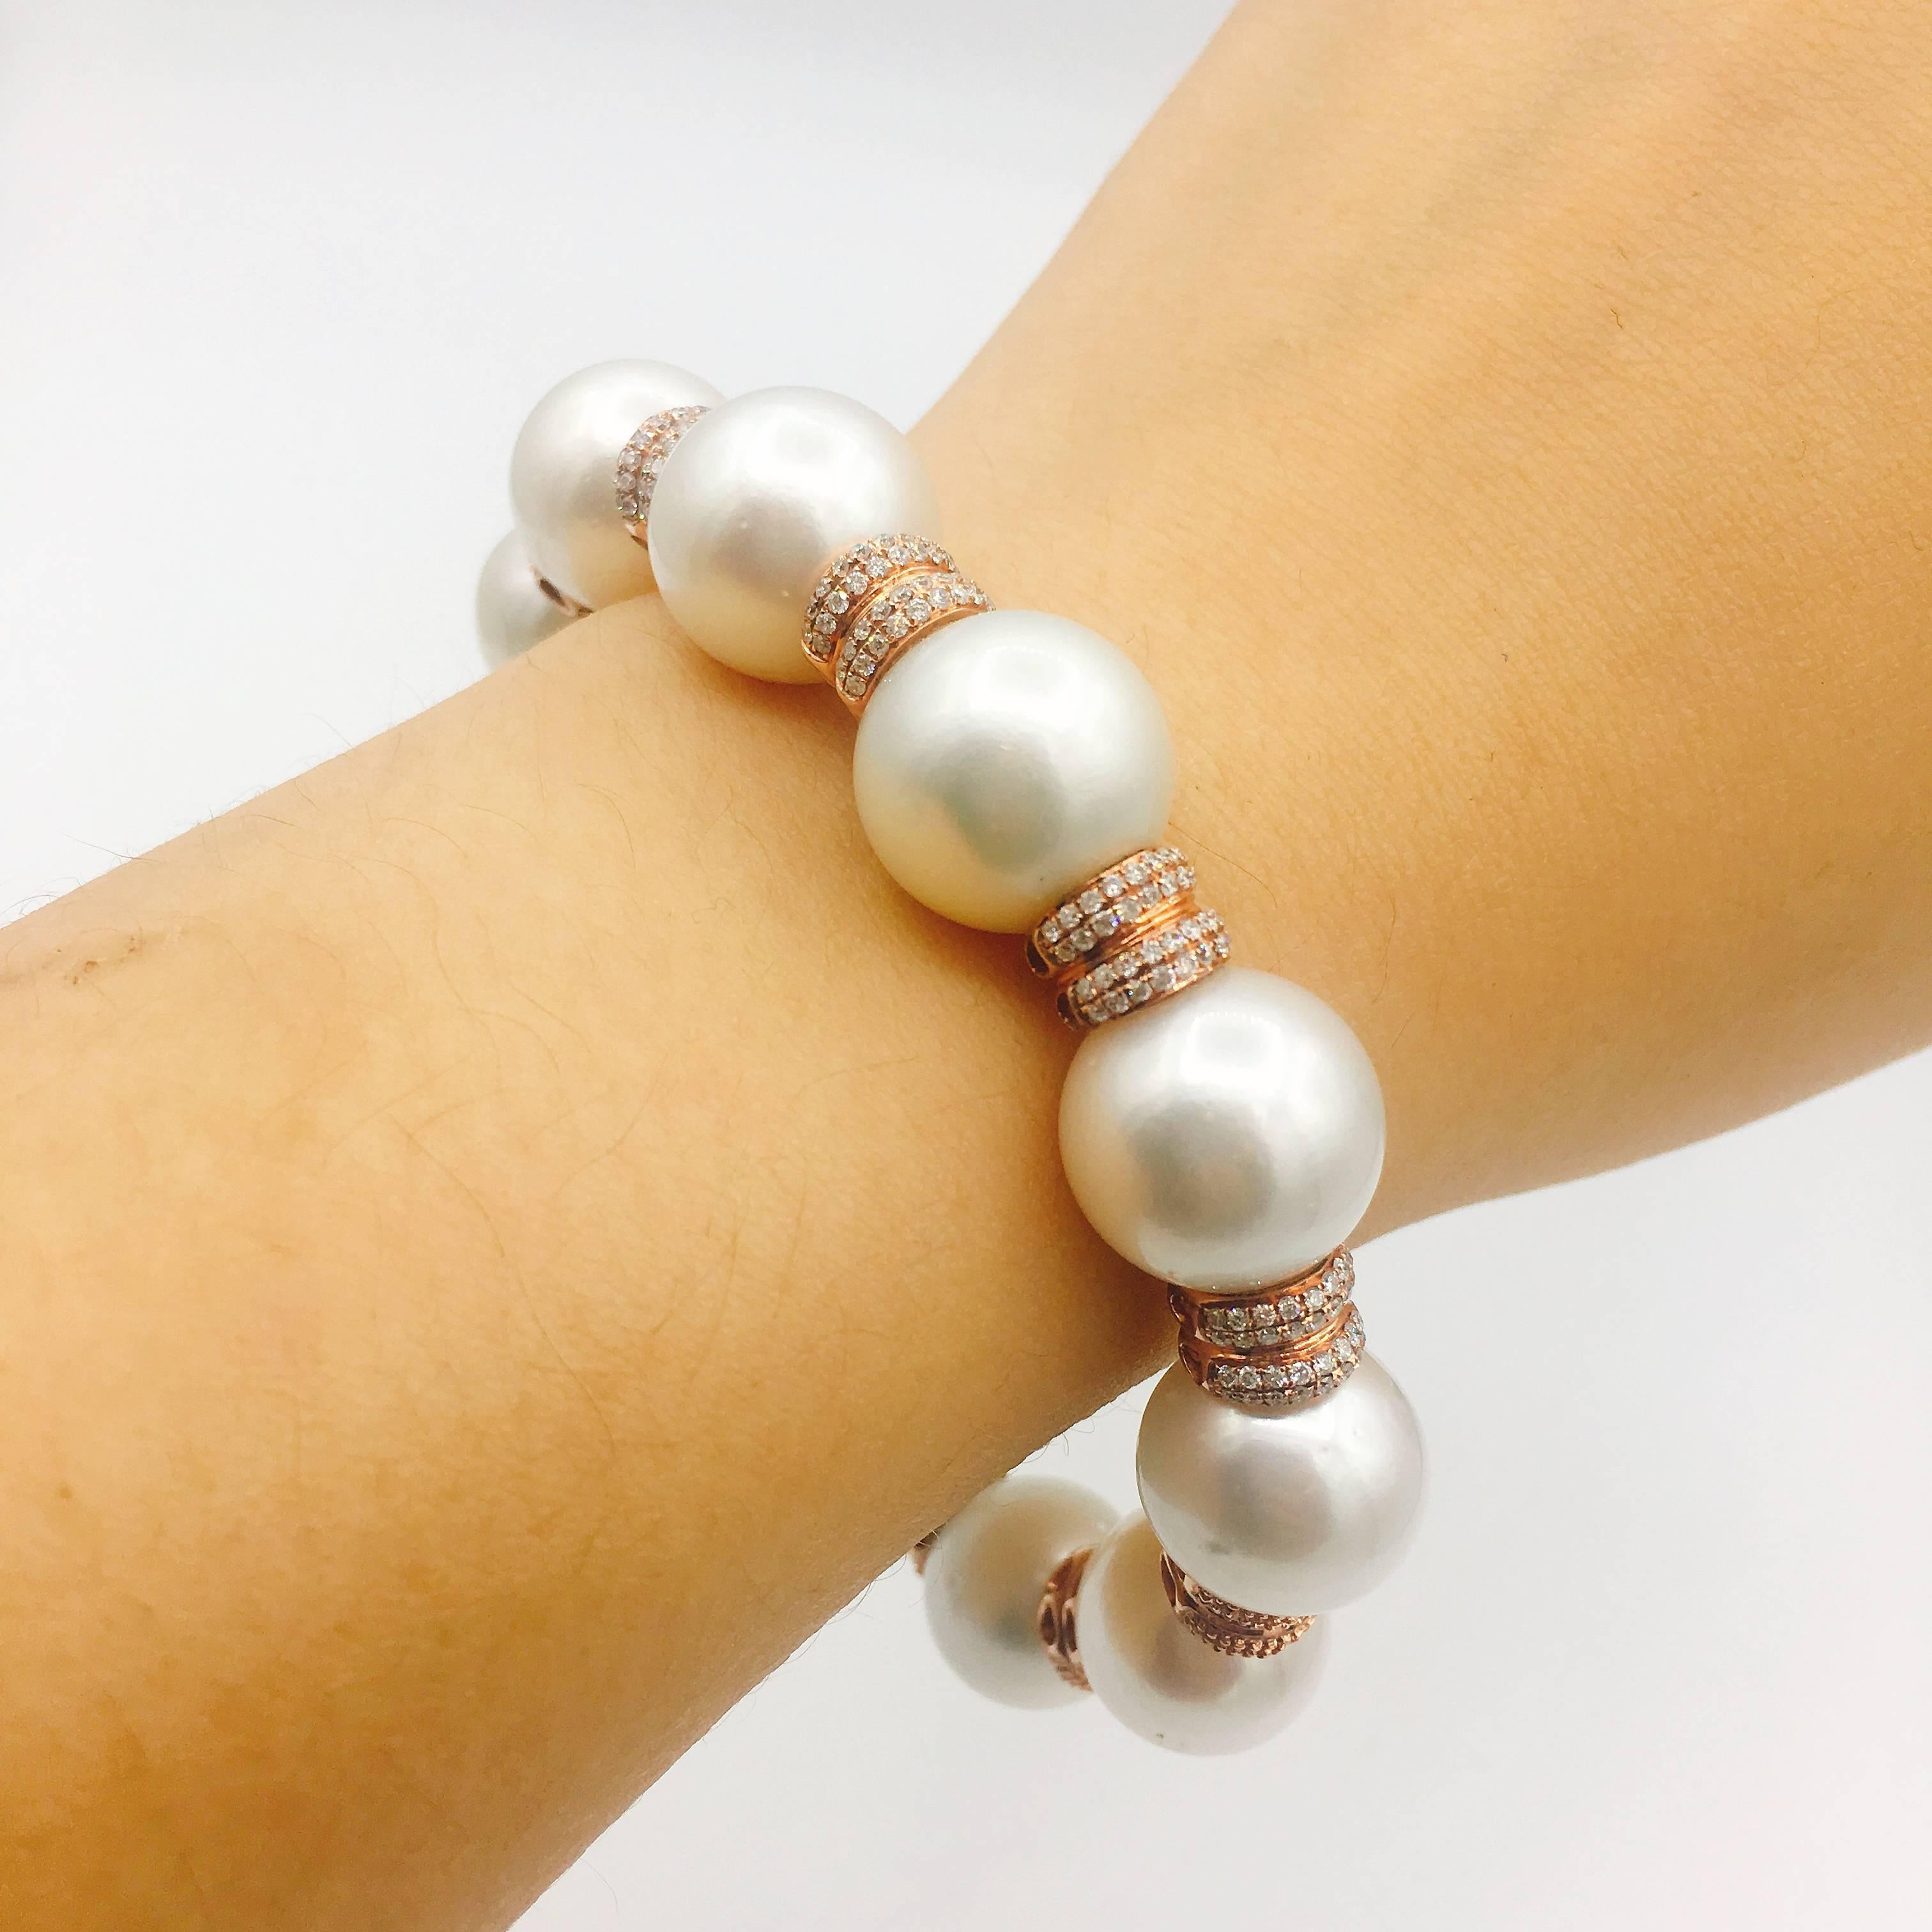 This cuff is extraordinary and very practical! We put a spring inside so the cuff is flexible and fits mostly all wrist sizes as it expands when putting it on. 
Pearl quality: AAAA gorgeous white 15mm south sea pearls rarely found in the deep south